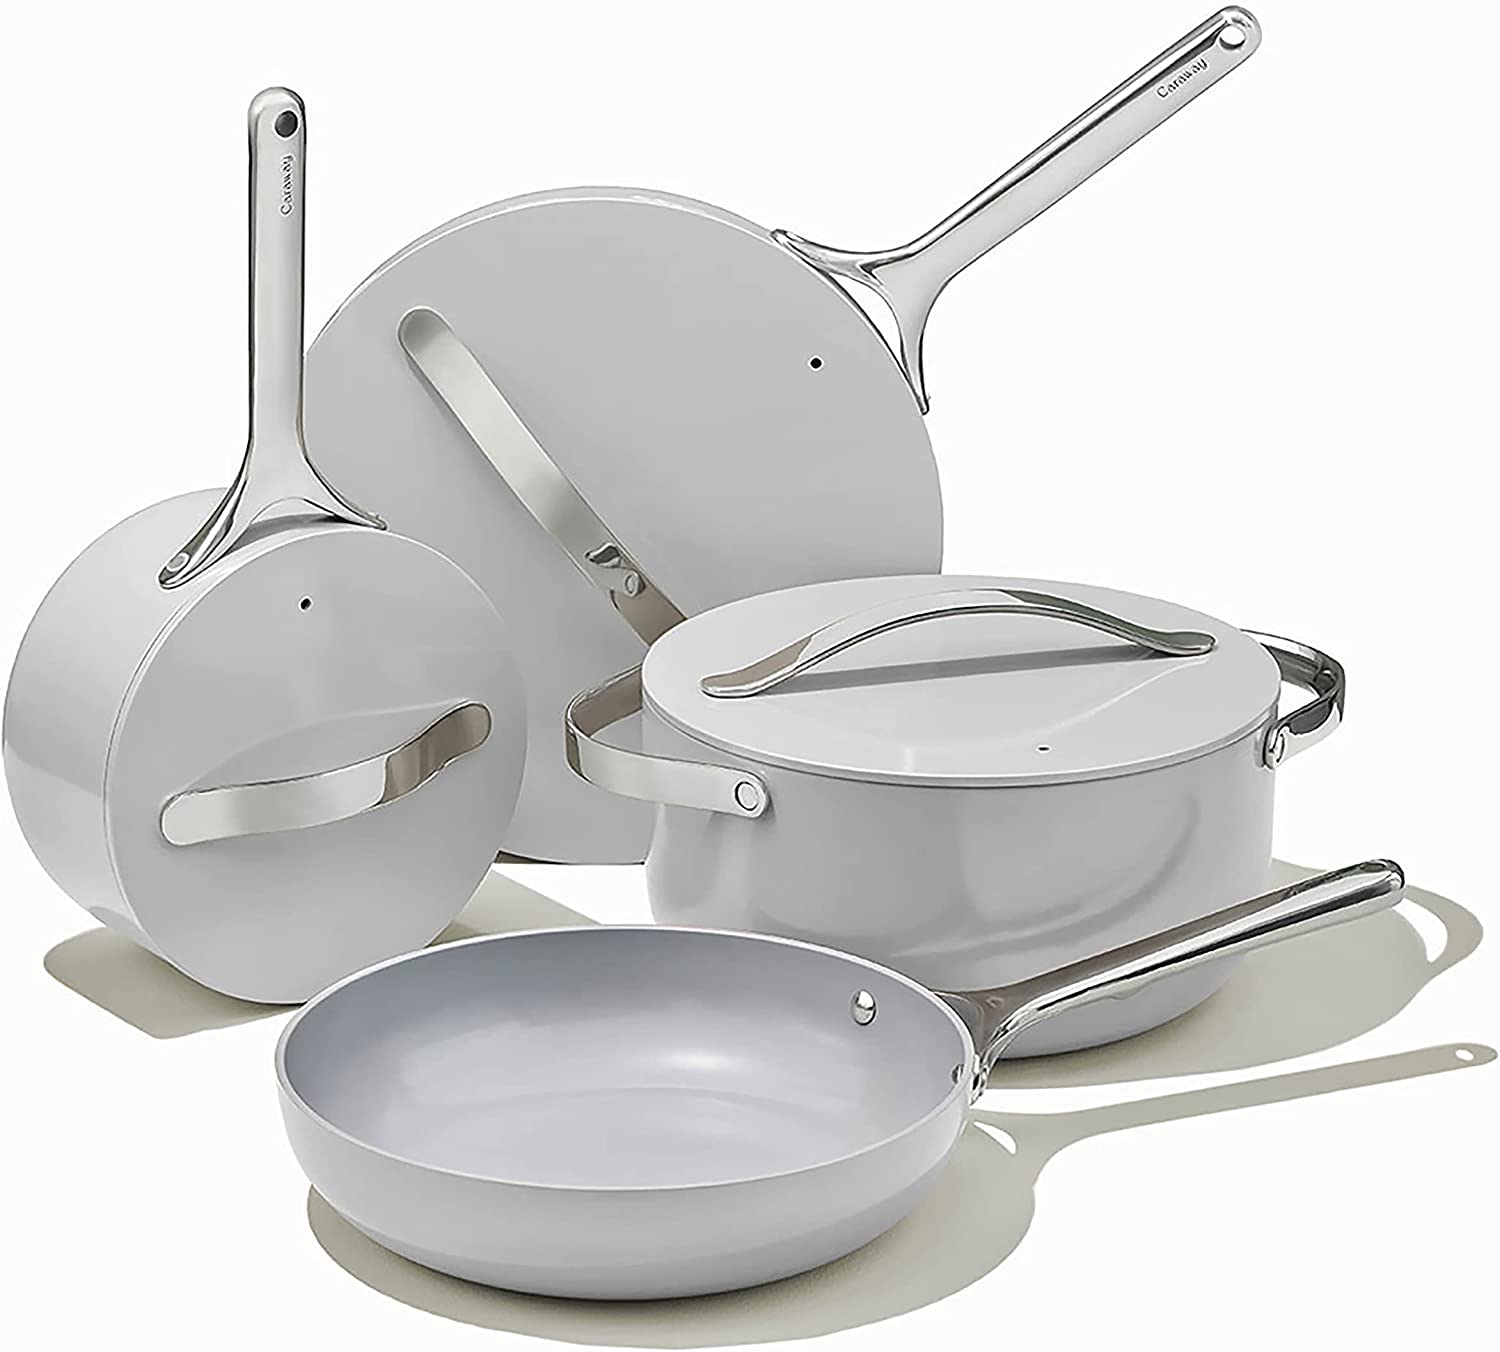 Caraway Is Now on , and Offering 22% Off Cookware and Bakeware Sets  for Prime Day